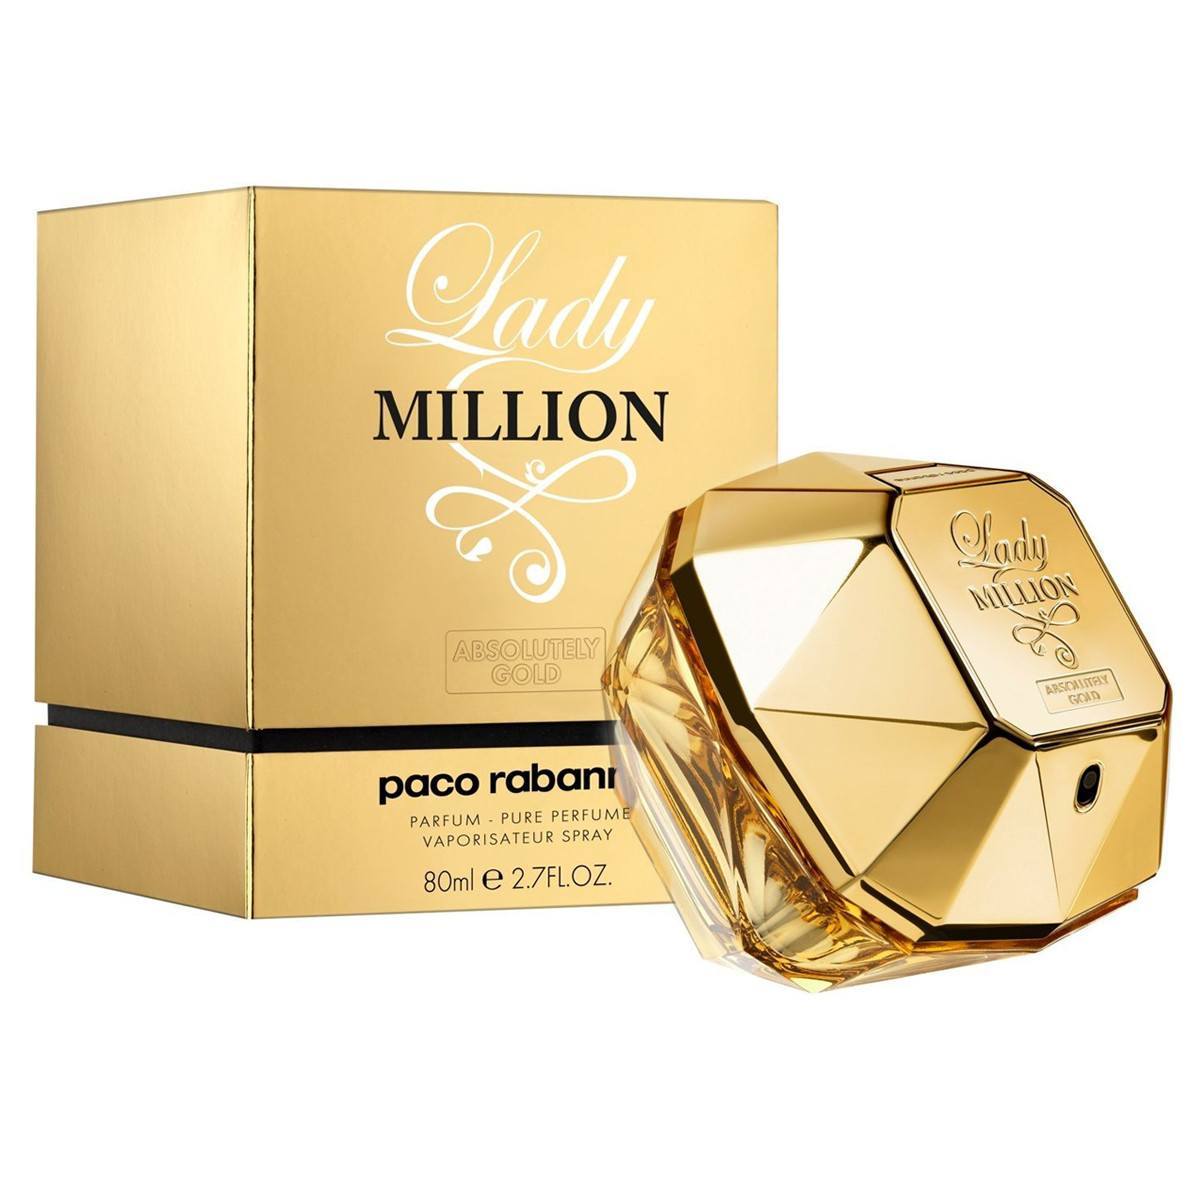 Paco Rabanne exclusively launches two new versions of the popular fragrances1 Million and Lady Million, to be premiered in travel retailers from 15 June to 13 August 2012. This is the Absolutely Gold collection that offers aromas of pure concentration, added to the already available EDP and EDT editions.<br><br>Lady Million Absolutely Gold, is also available in pure perfume concentration, offering seductive blend of raspberries that tickles your fancy in the top notes. The heart of flower petals flourish with elegant jasmine and orange blossom, placed on the base of cashmerean and neroli essence and that leave a provocative and heady trail.<br><br>Available as 80ml pure perfume.